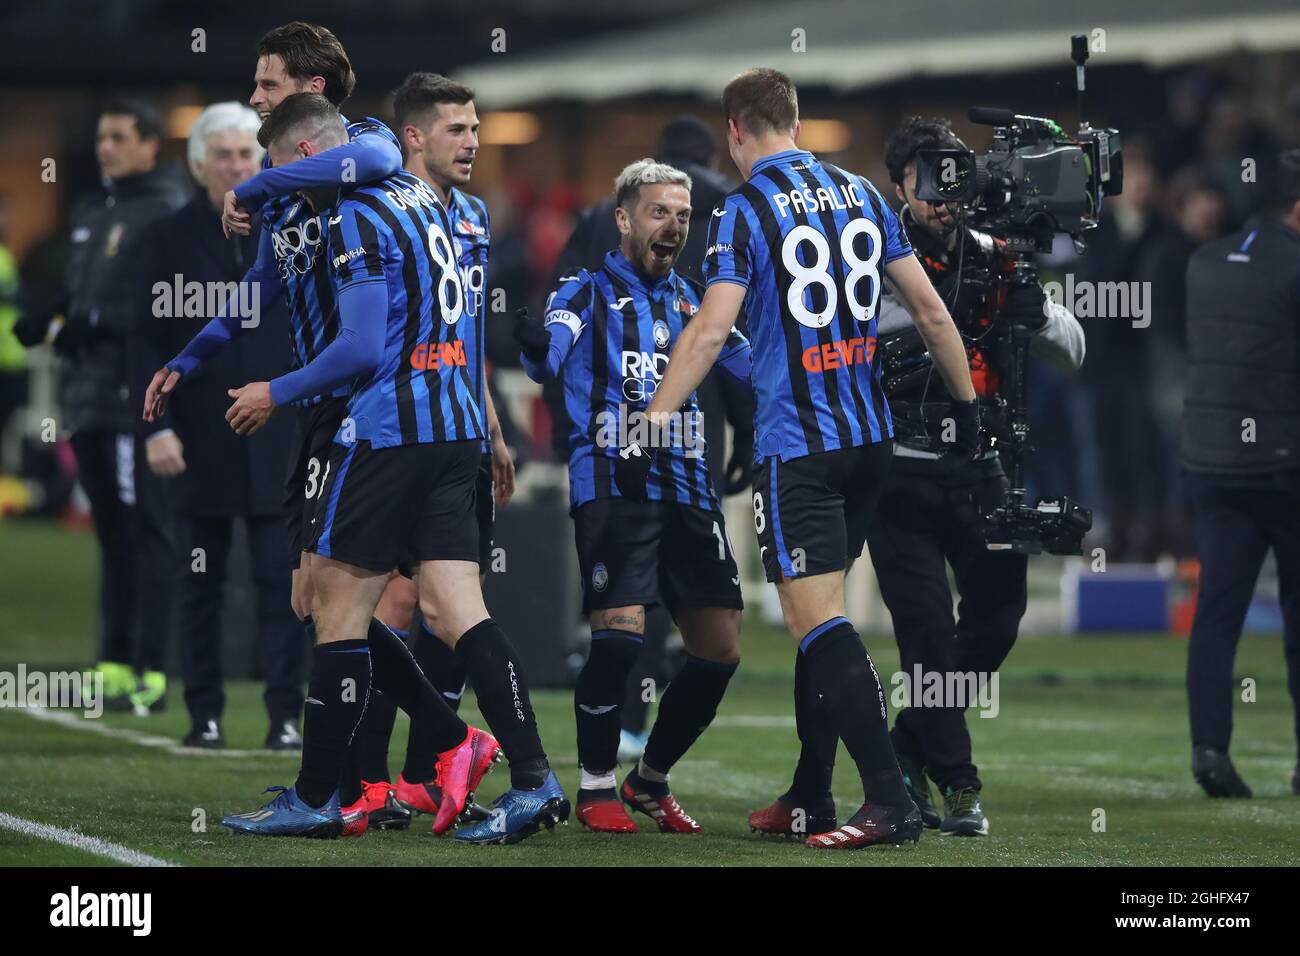 Mario Pasalic of Atalanta celebrates with team mate Alejandro Gomez barely seconds after coming on as a substitute to give the side a 2-1 lead during the Serie A match at Gewiss Stadium, Bergamo. Picture date: 15th February 2020. Picture credit should read: Jonathan Moscrop/Sportimage via PA Images Stock Photo